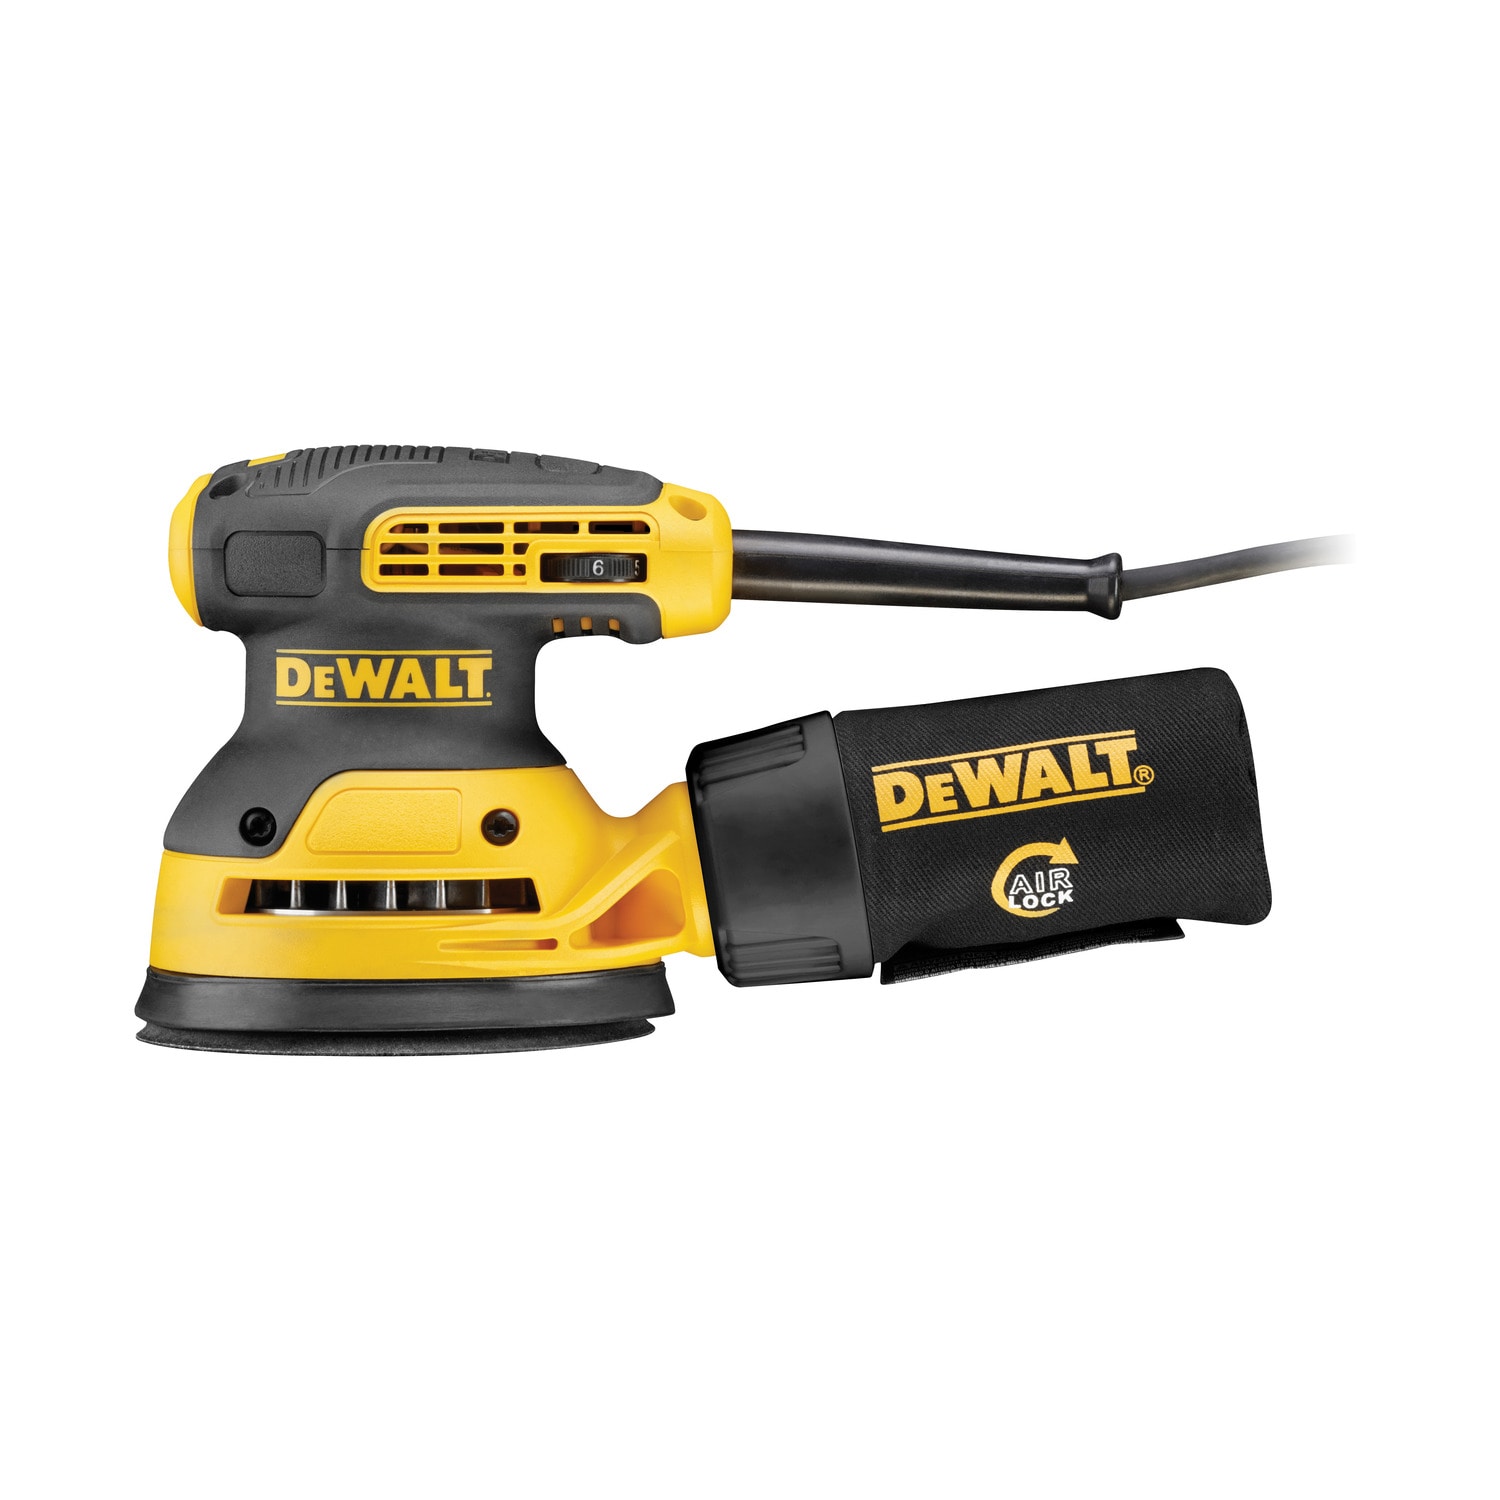 DEWALT 3-Amp Corded Sander with Dust Management in the Power Sanders department at